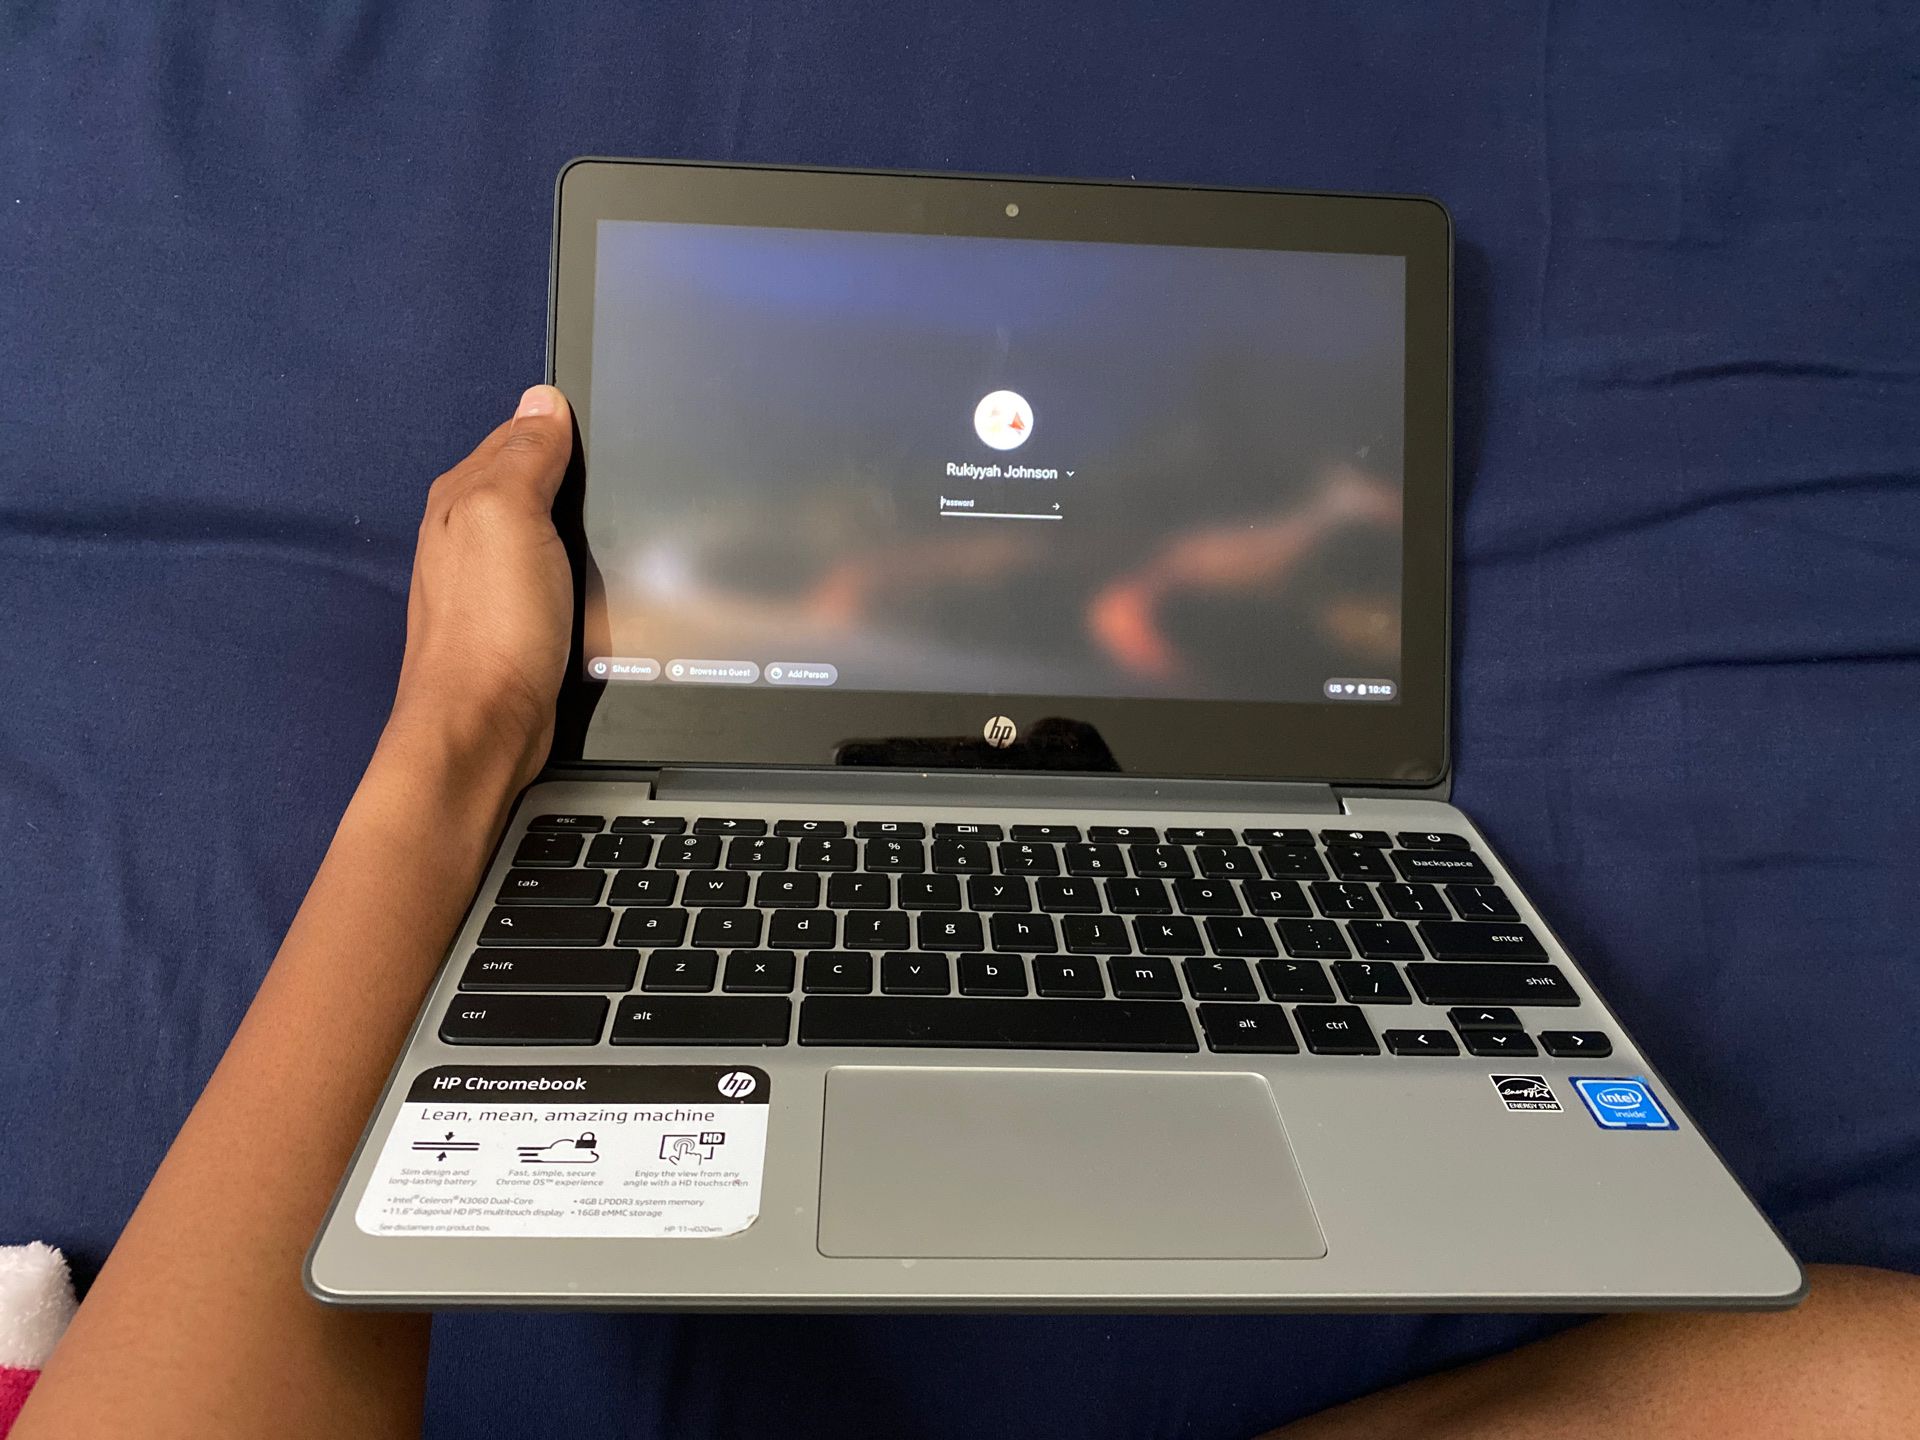 HP chrome book with touchscreen